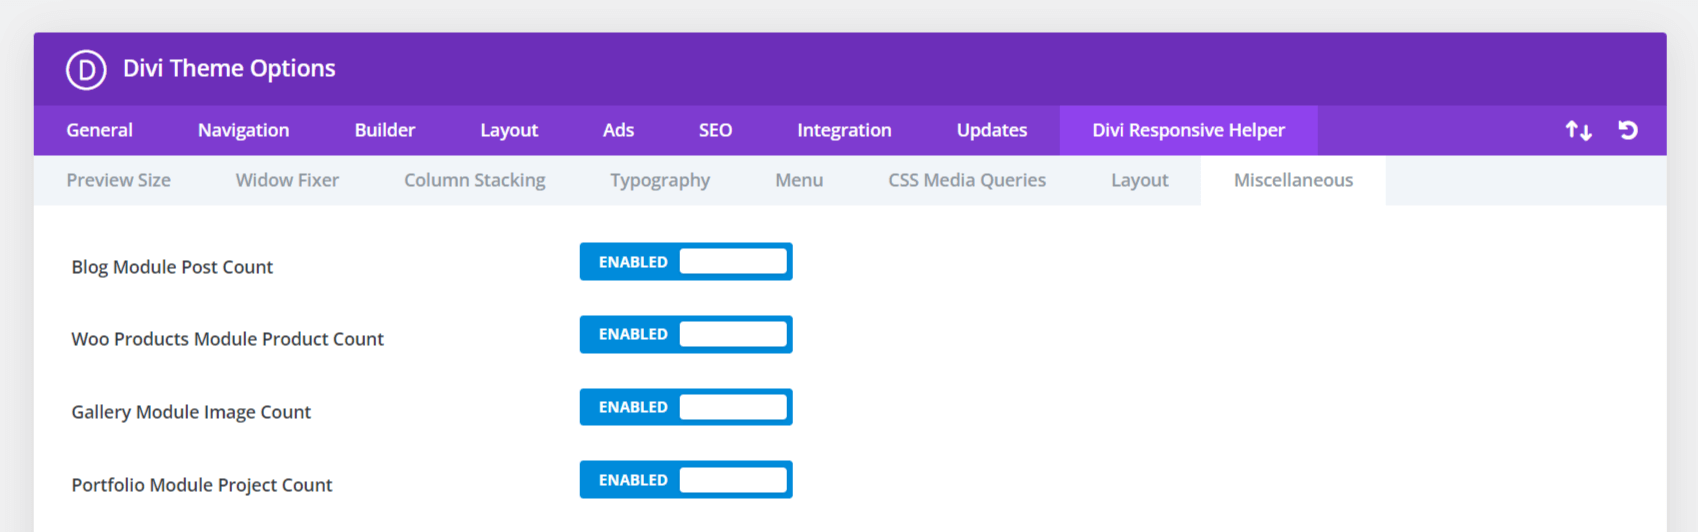 Divi Theme Options showing item count in Blog Gallery Portfolio Woo Products modules